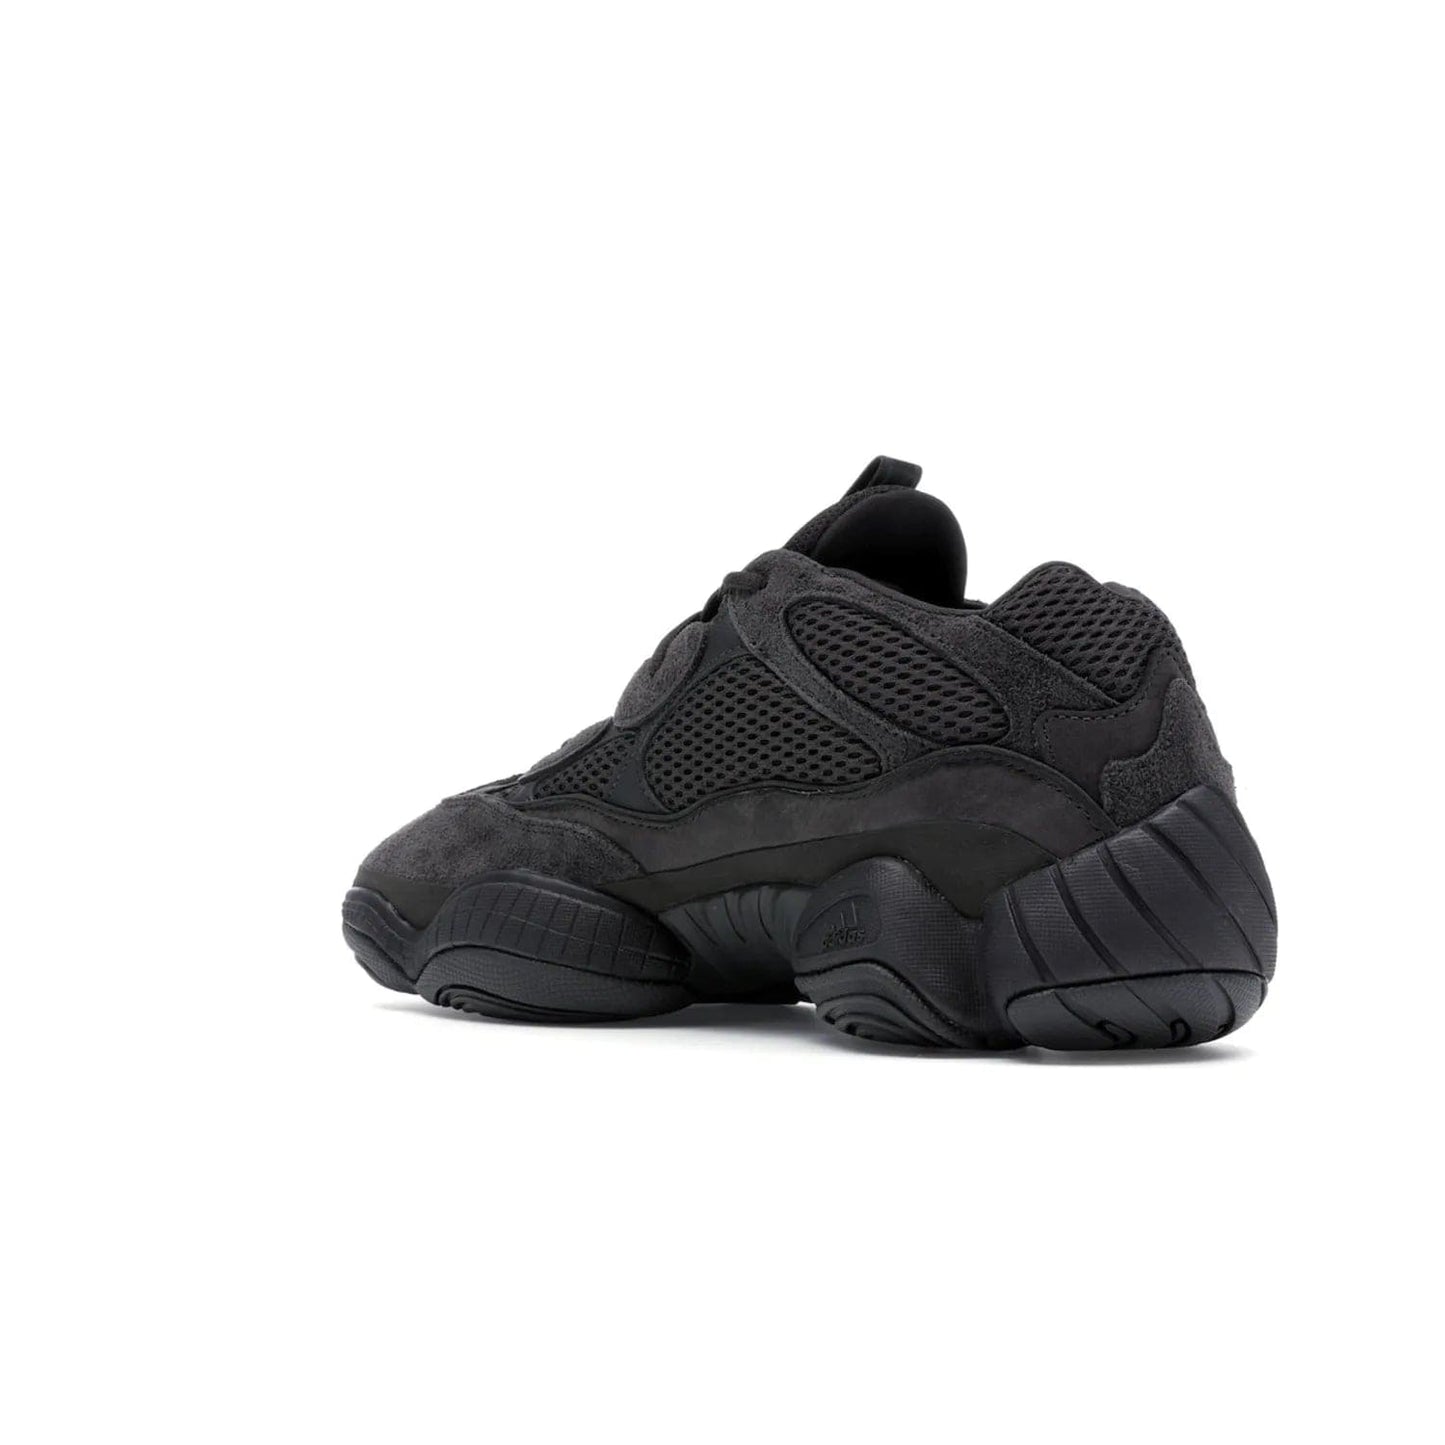 adidas Yeezy 500 Utility Black - Image 24 - Only at www.BallersClubKickz.com - Iconic adidas Yeezy 500 Utility Black in All-Black colorway. Durable black mesh and suede upper with adiPRENE® sole delivers comfort and support. Be unstoppable with the Yeezy 500 Utility Black. Released July 2018.